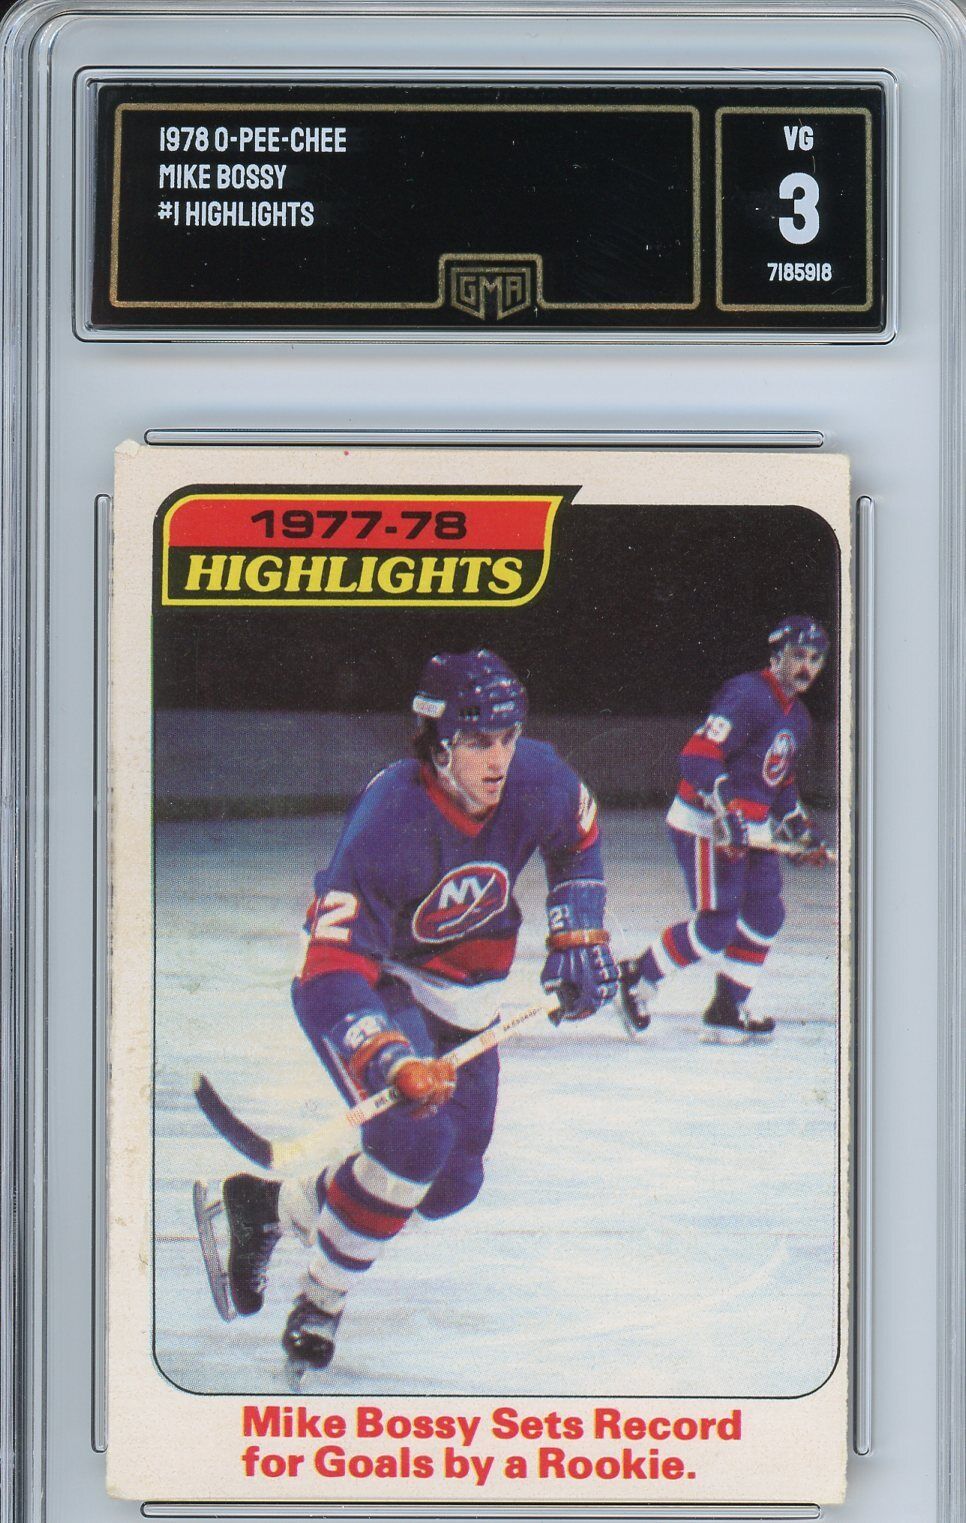 1978 O-Pee-Chee Mike Bossy #1 Highlights Rookie Card GMA 3